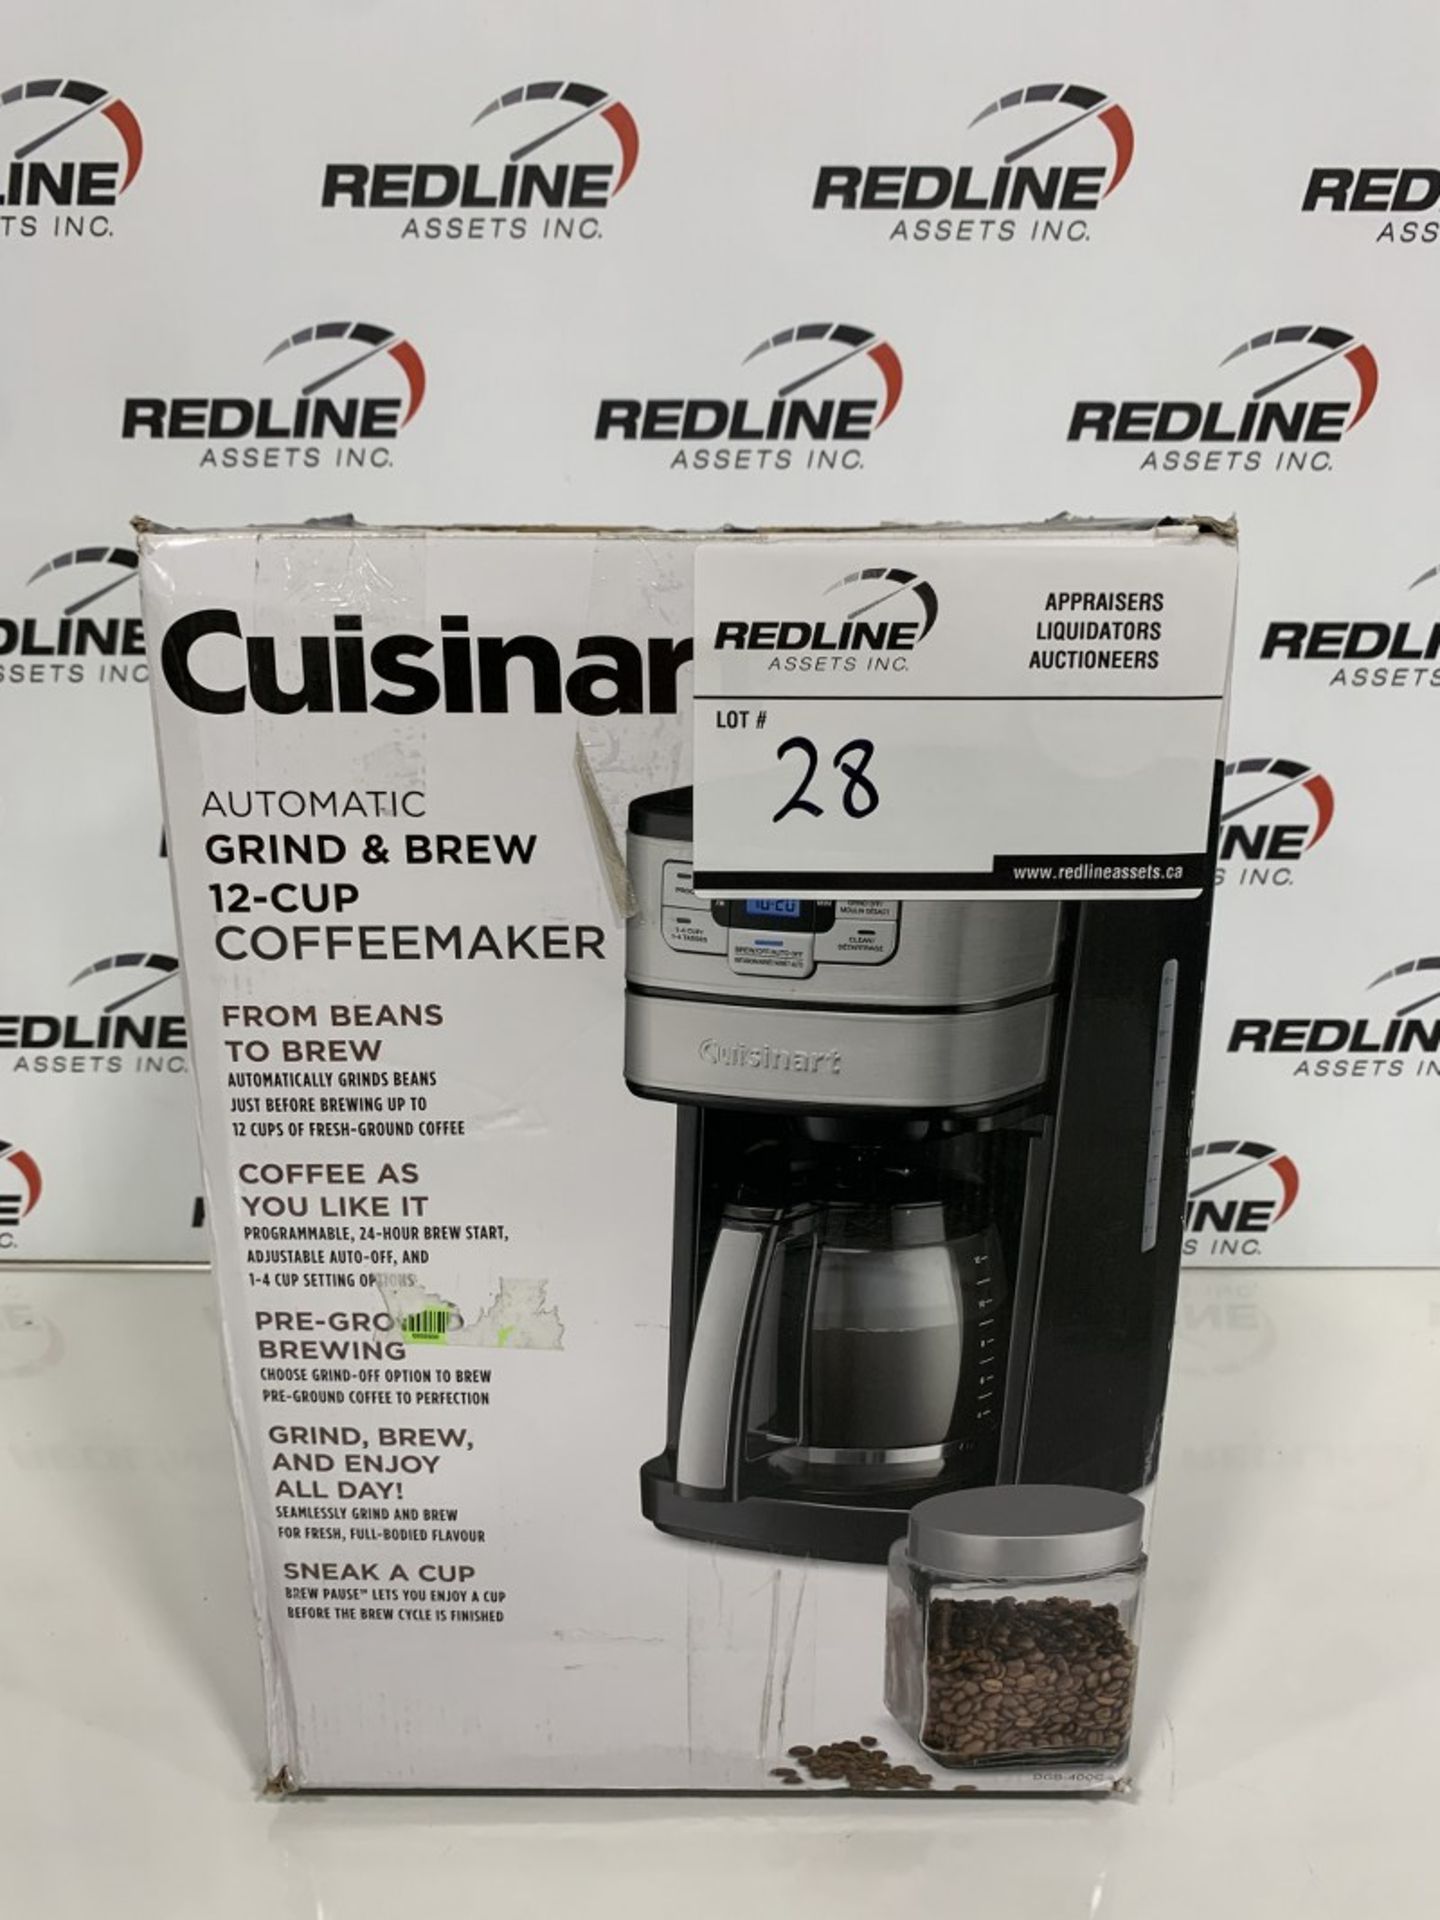 CUISINART - AUTOMATIC GRIND & BREW 12 CUP COFFEE MAKER